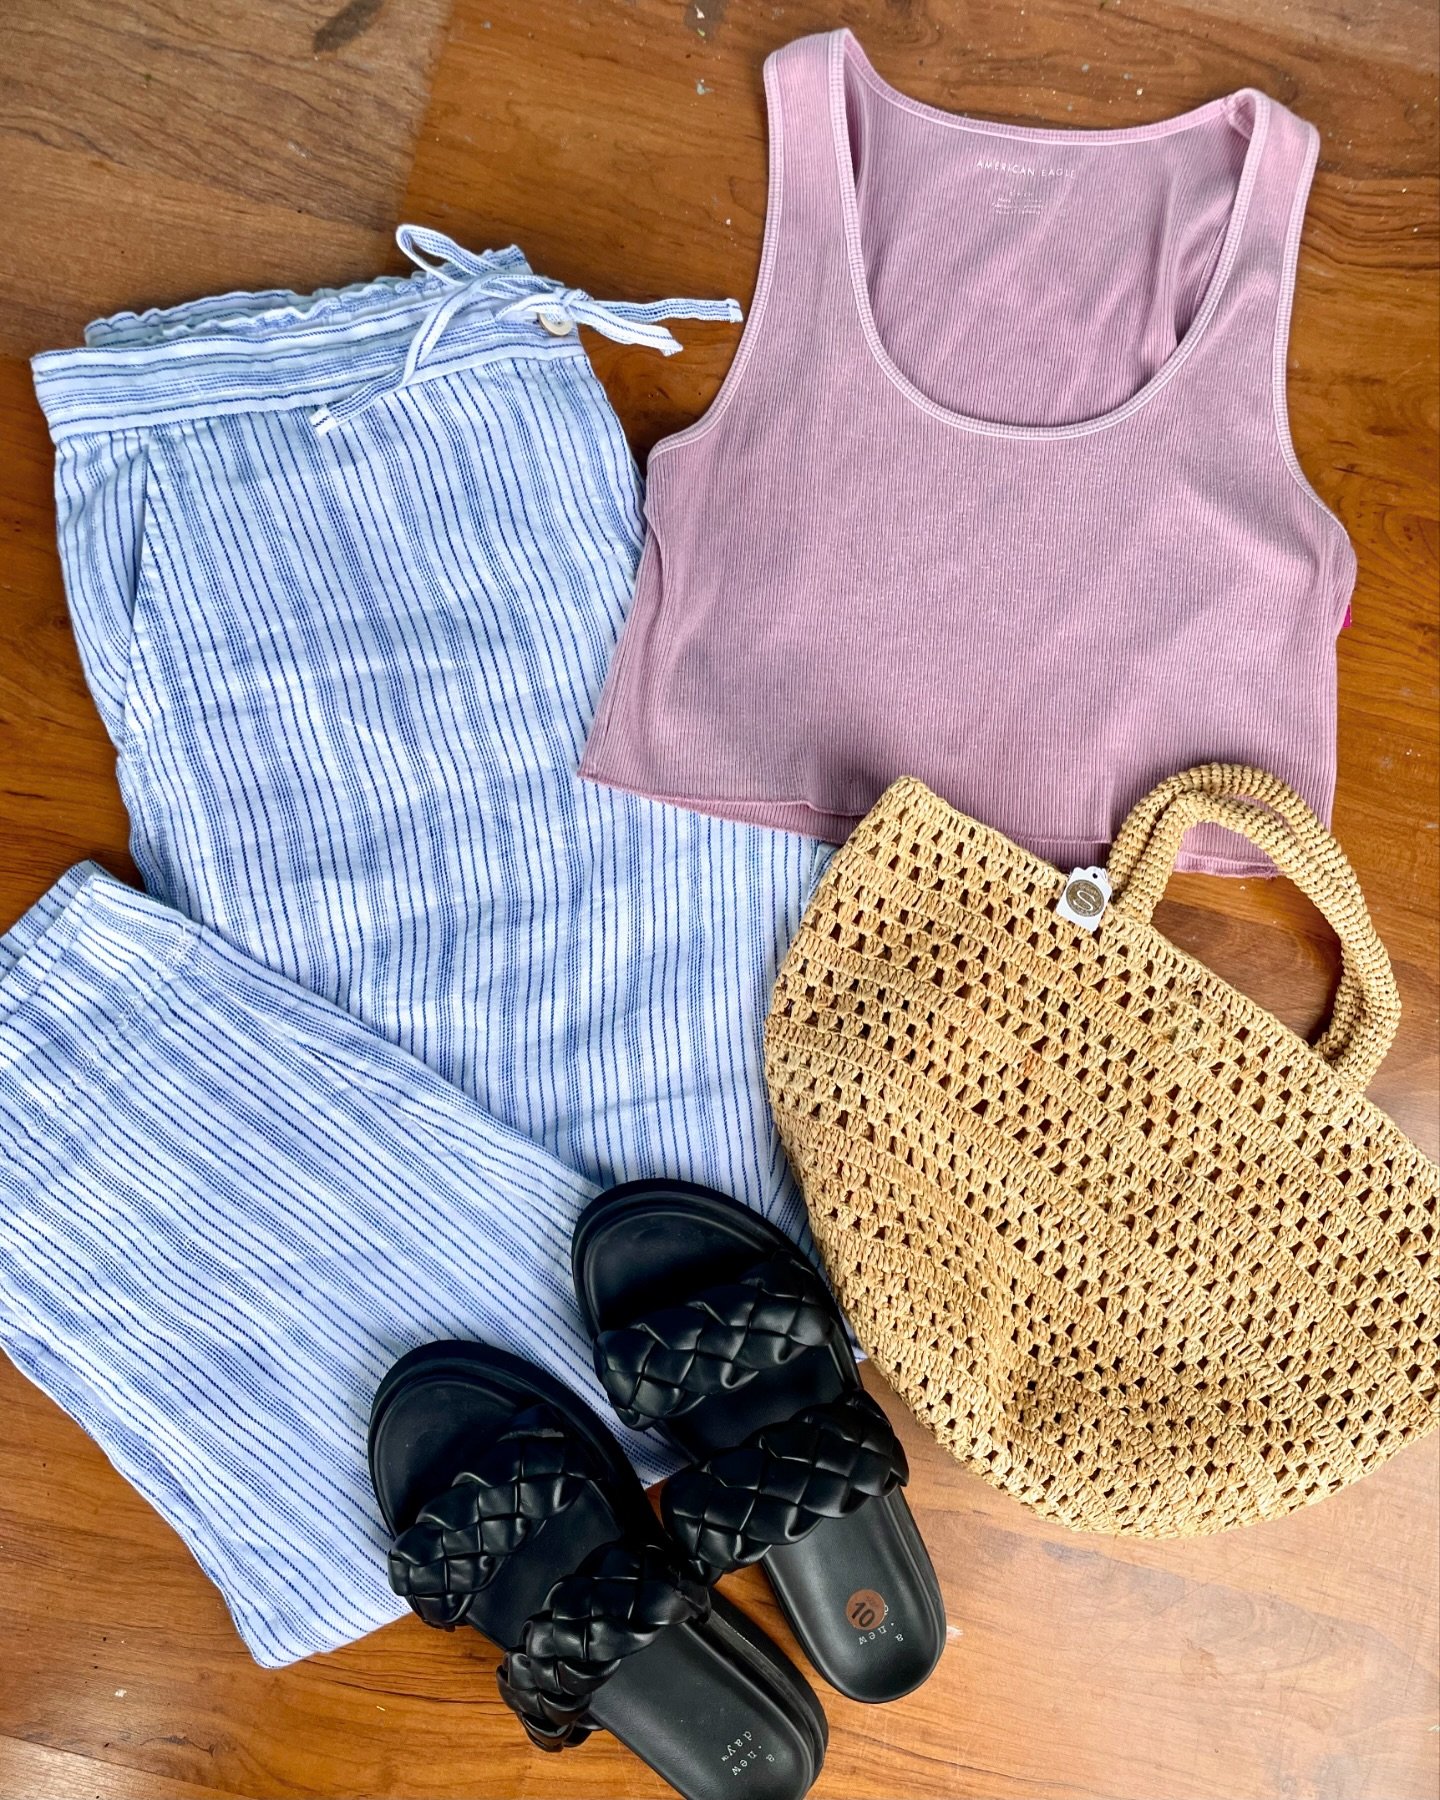 Who else is following the striped linen pants trend!?🙋&zwj;♀️

You can still stay on trend when you shop small!😊🛍️ 
Stop in today, we&rsquo;re here till 6pm!
&bull;
&bull;
&bull;
Pants: x-large, $20.49
Tank: small, &amp;$5.99
Shoes: 10, $8.99
Purs